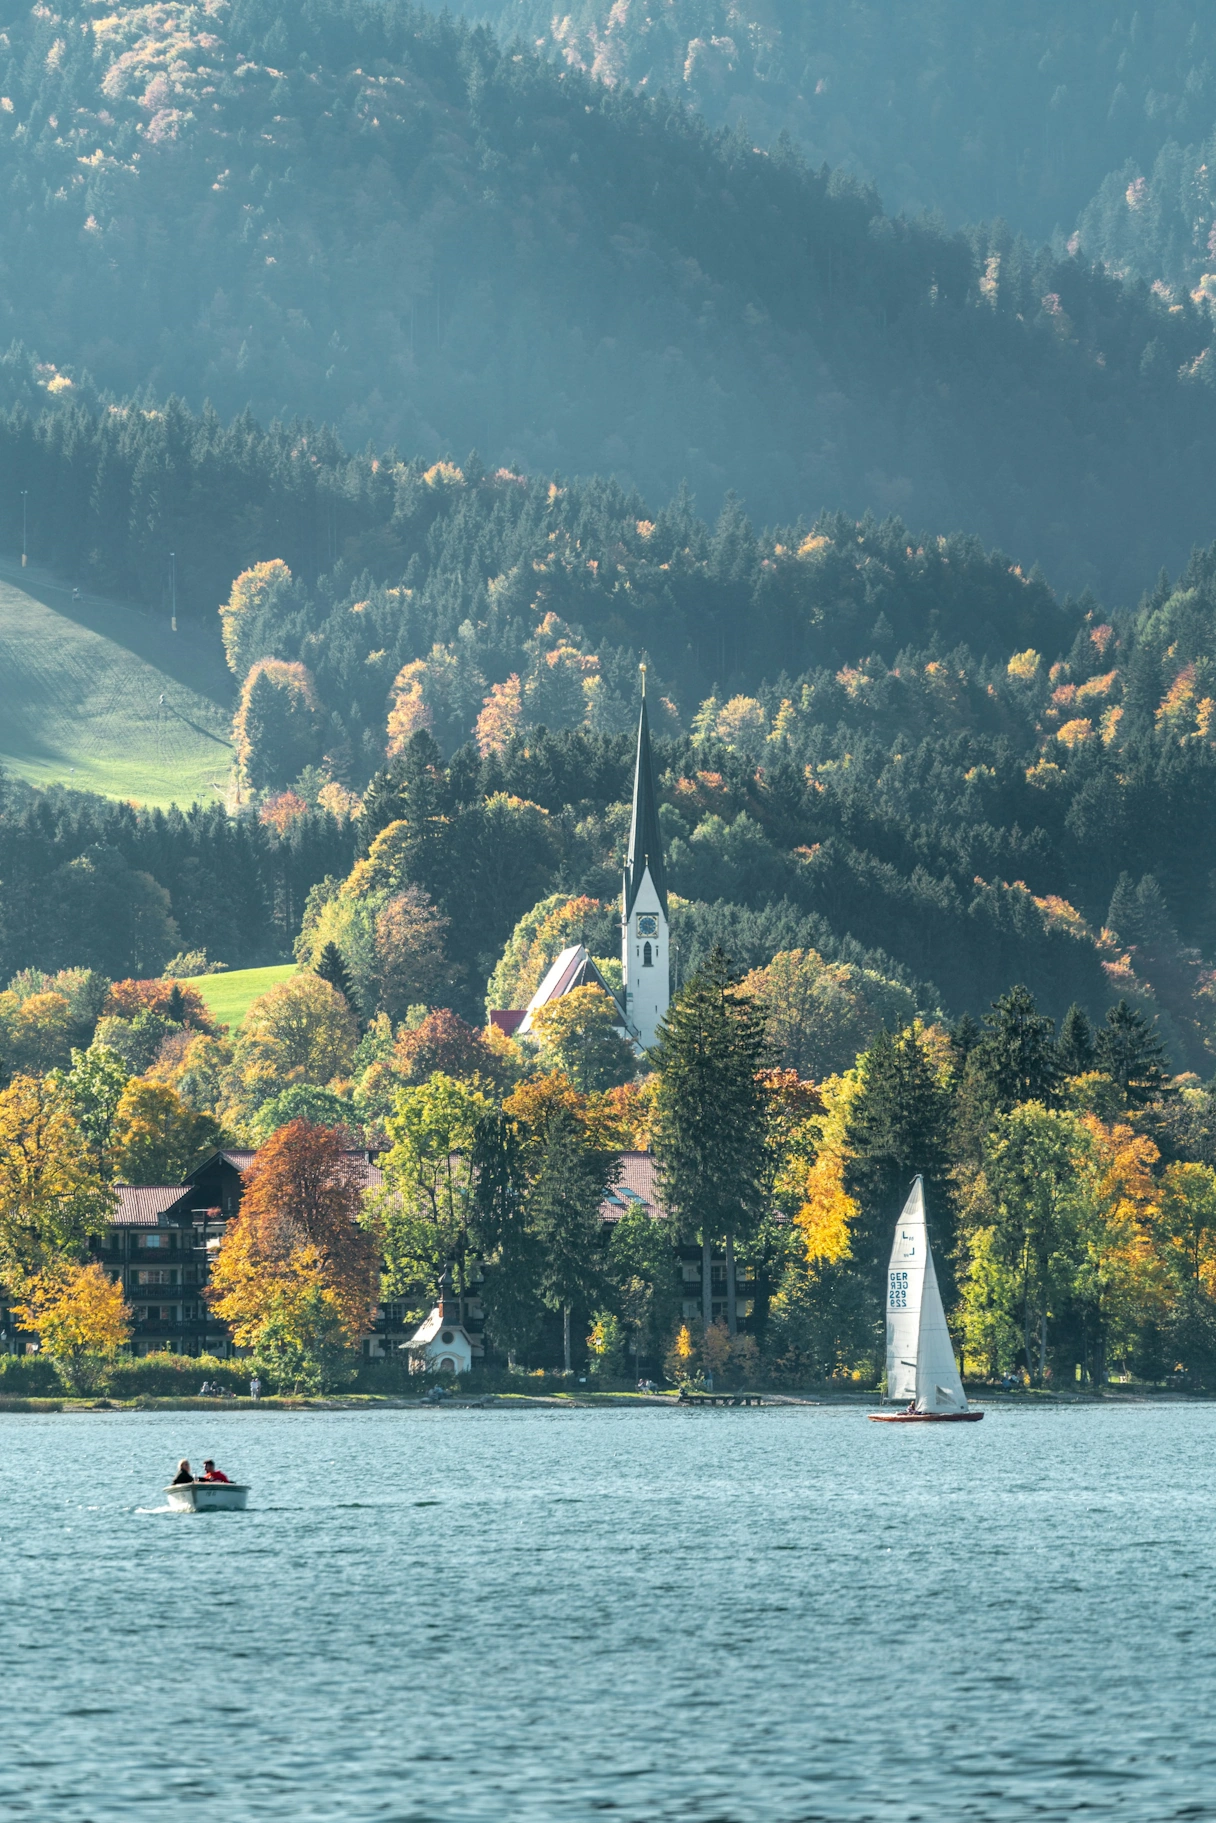 View of Lake Tegernsee with boats and forest in the background